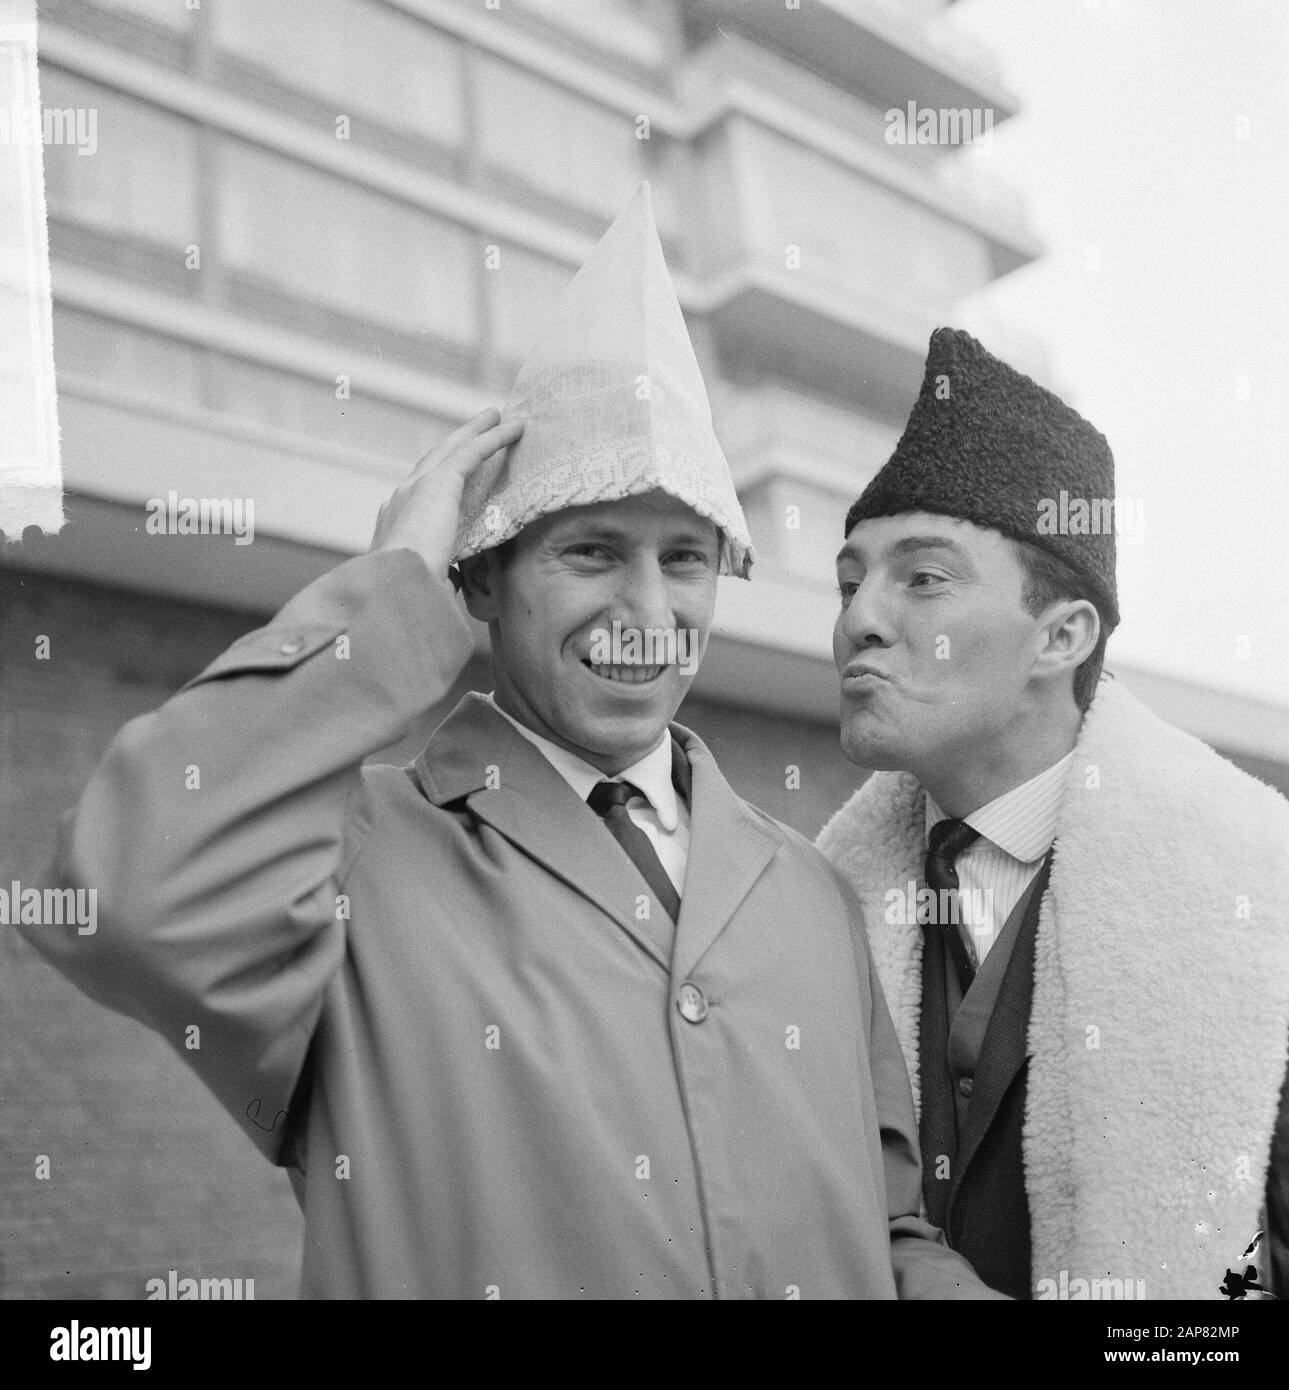 Bobby Charlton and right Jimmy Greaves in front of the Hiltonhotel in Amsterdam (with hats on) Date: December 8, 1964 Location: Amsterdam, Noord-Holland Keywords: HATSEN Personal name: Bobby Charlton , Jimmy Greaves Institution name: Hiltonhotel Stock Photo